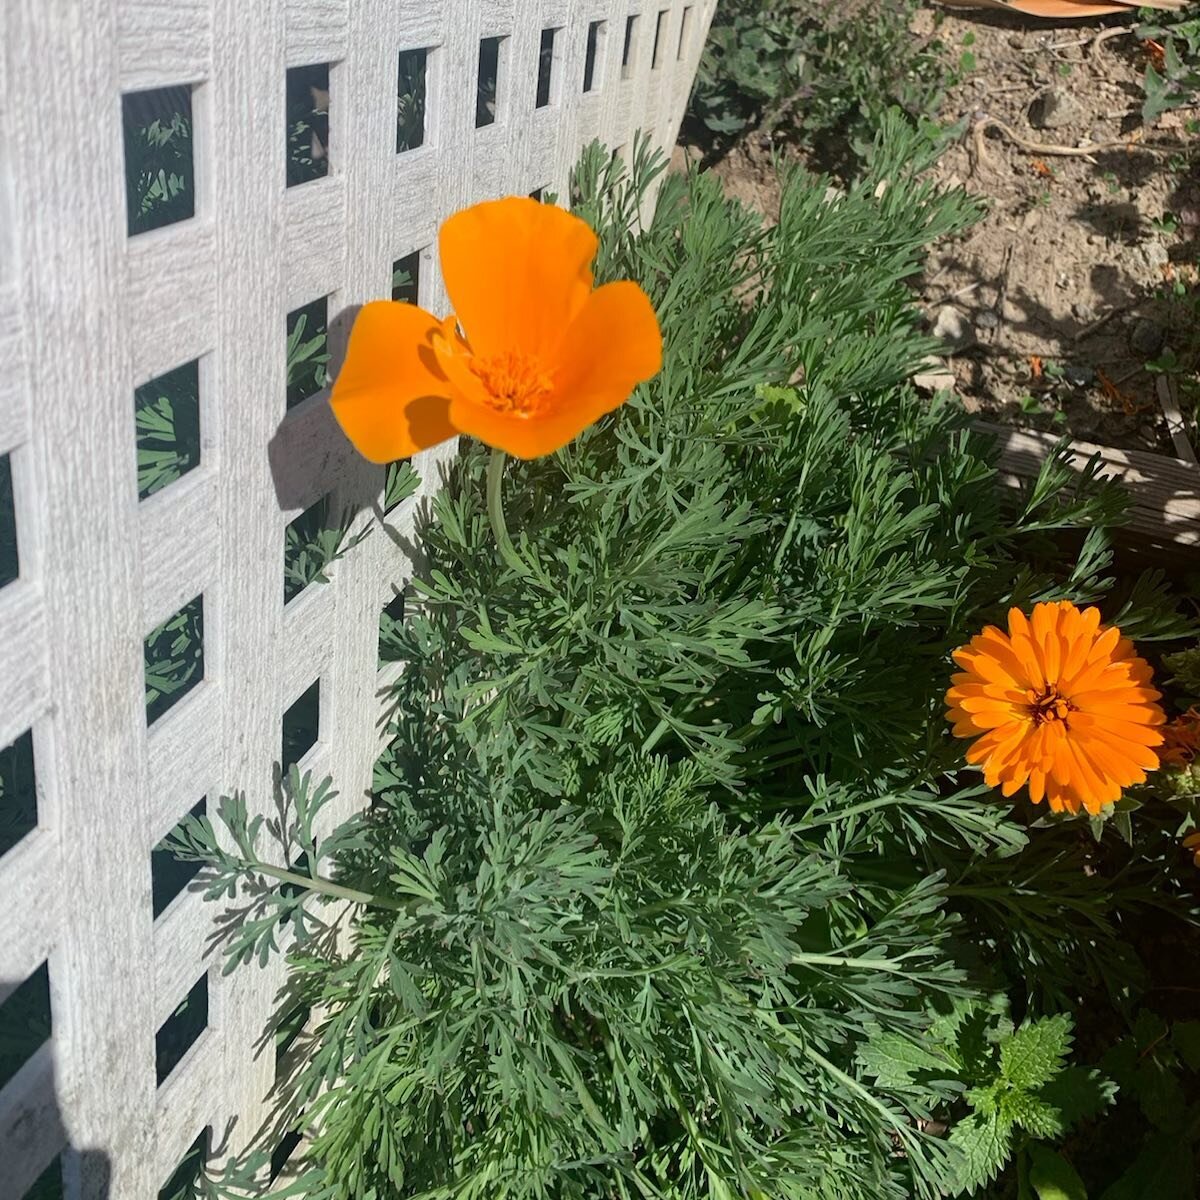 Butterfly Garden is starting to bloom!